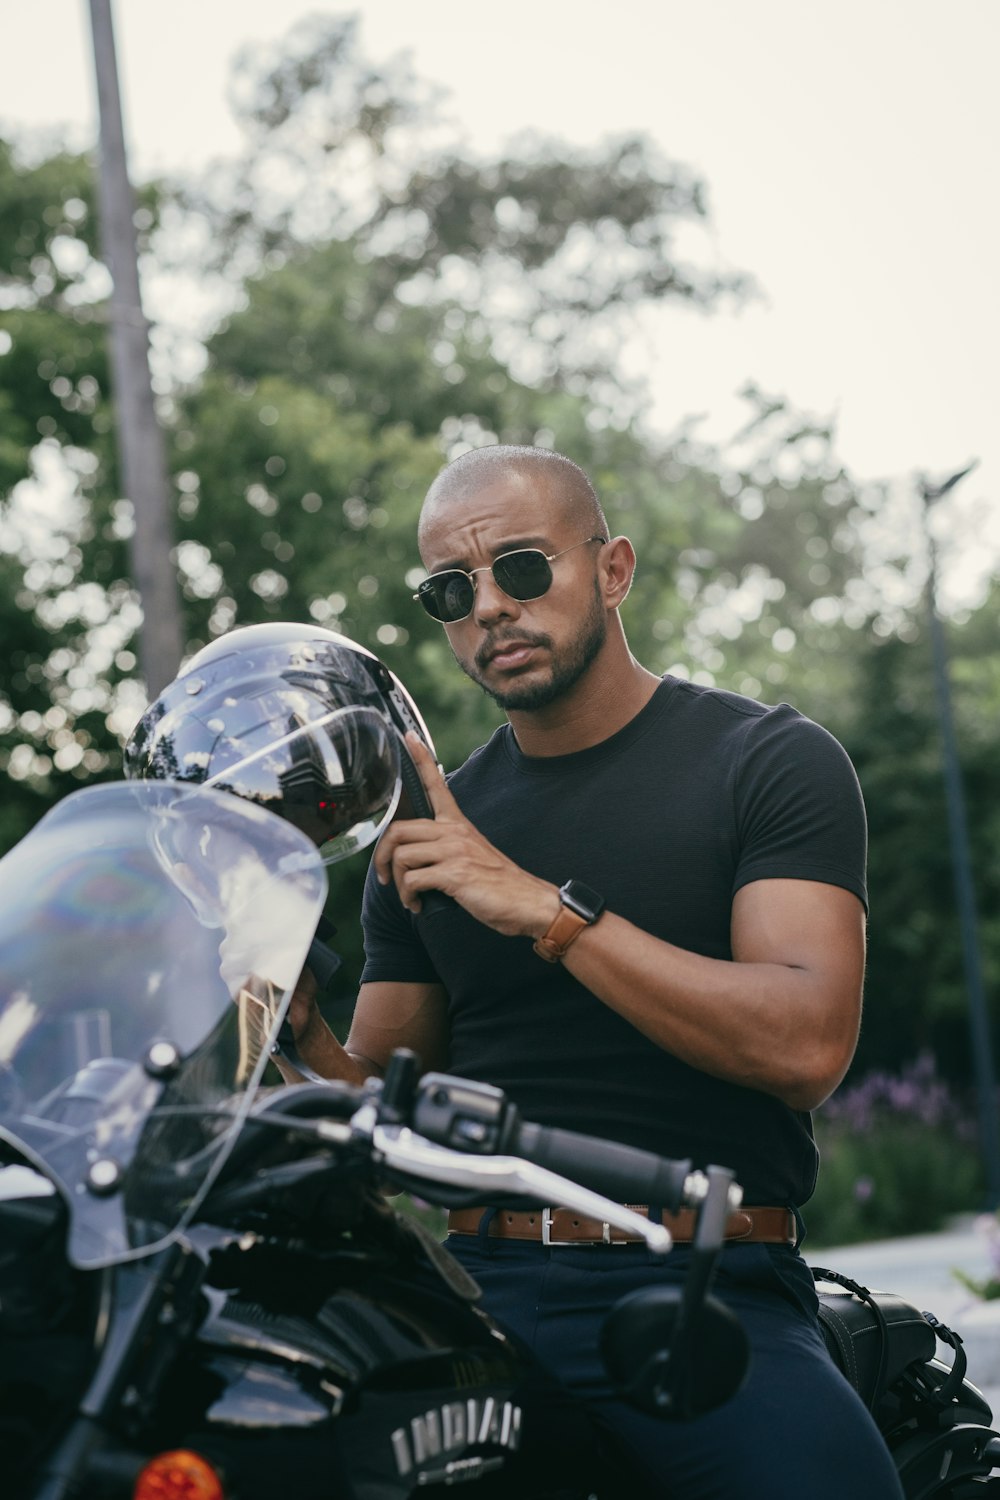 a man sitting on a motorcycle